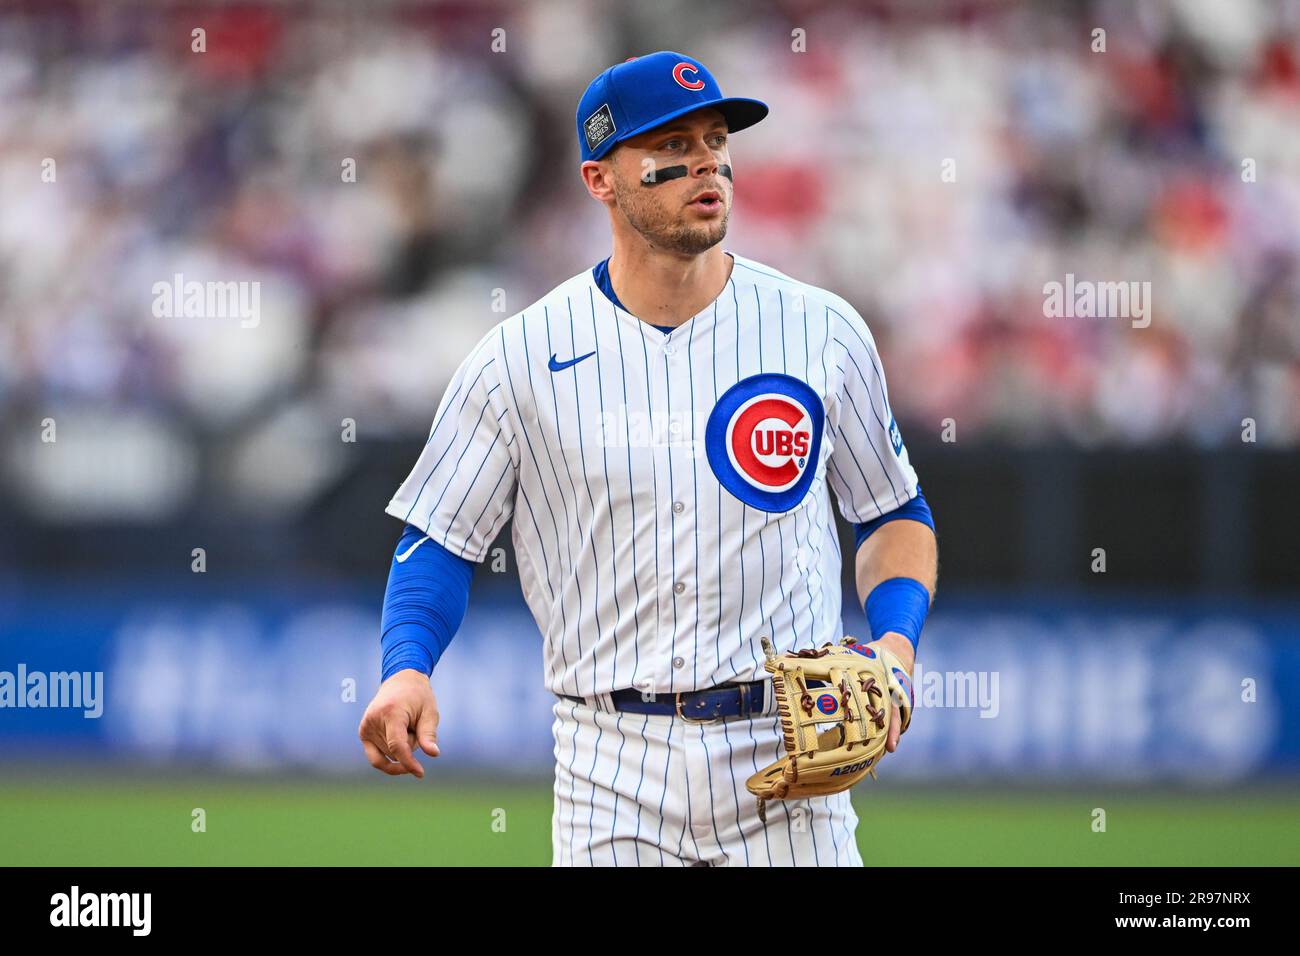 MLB London Series: Cubs-Cardinals, date, time, TV, live stream